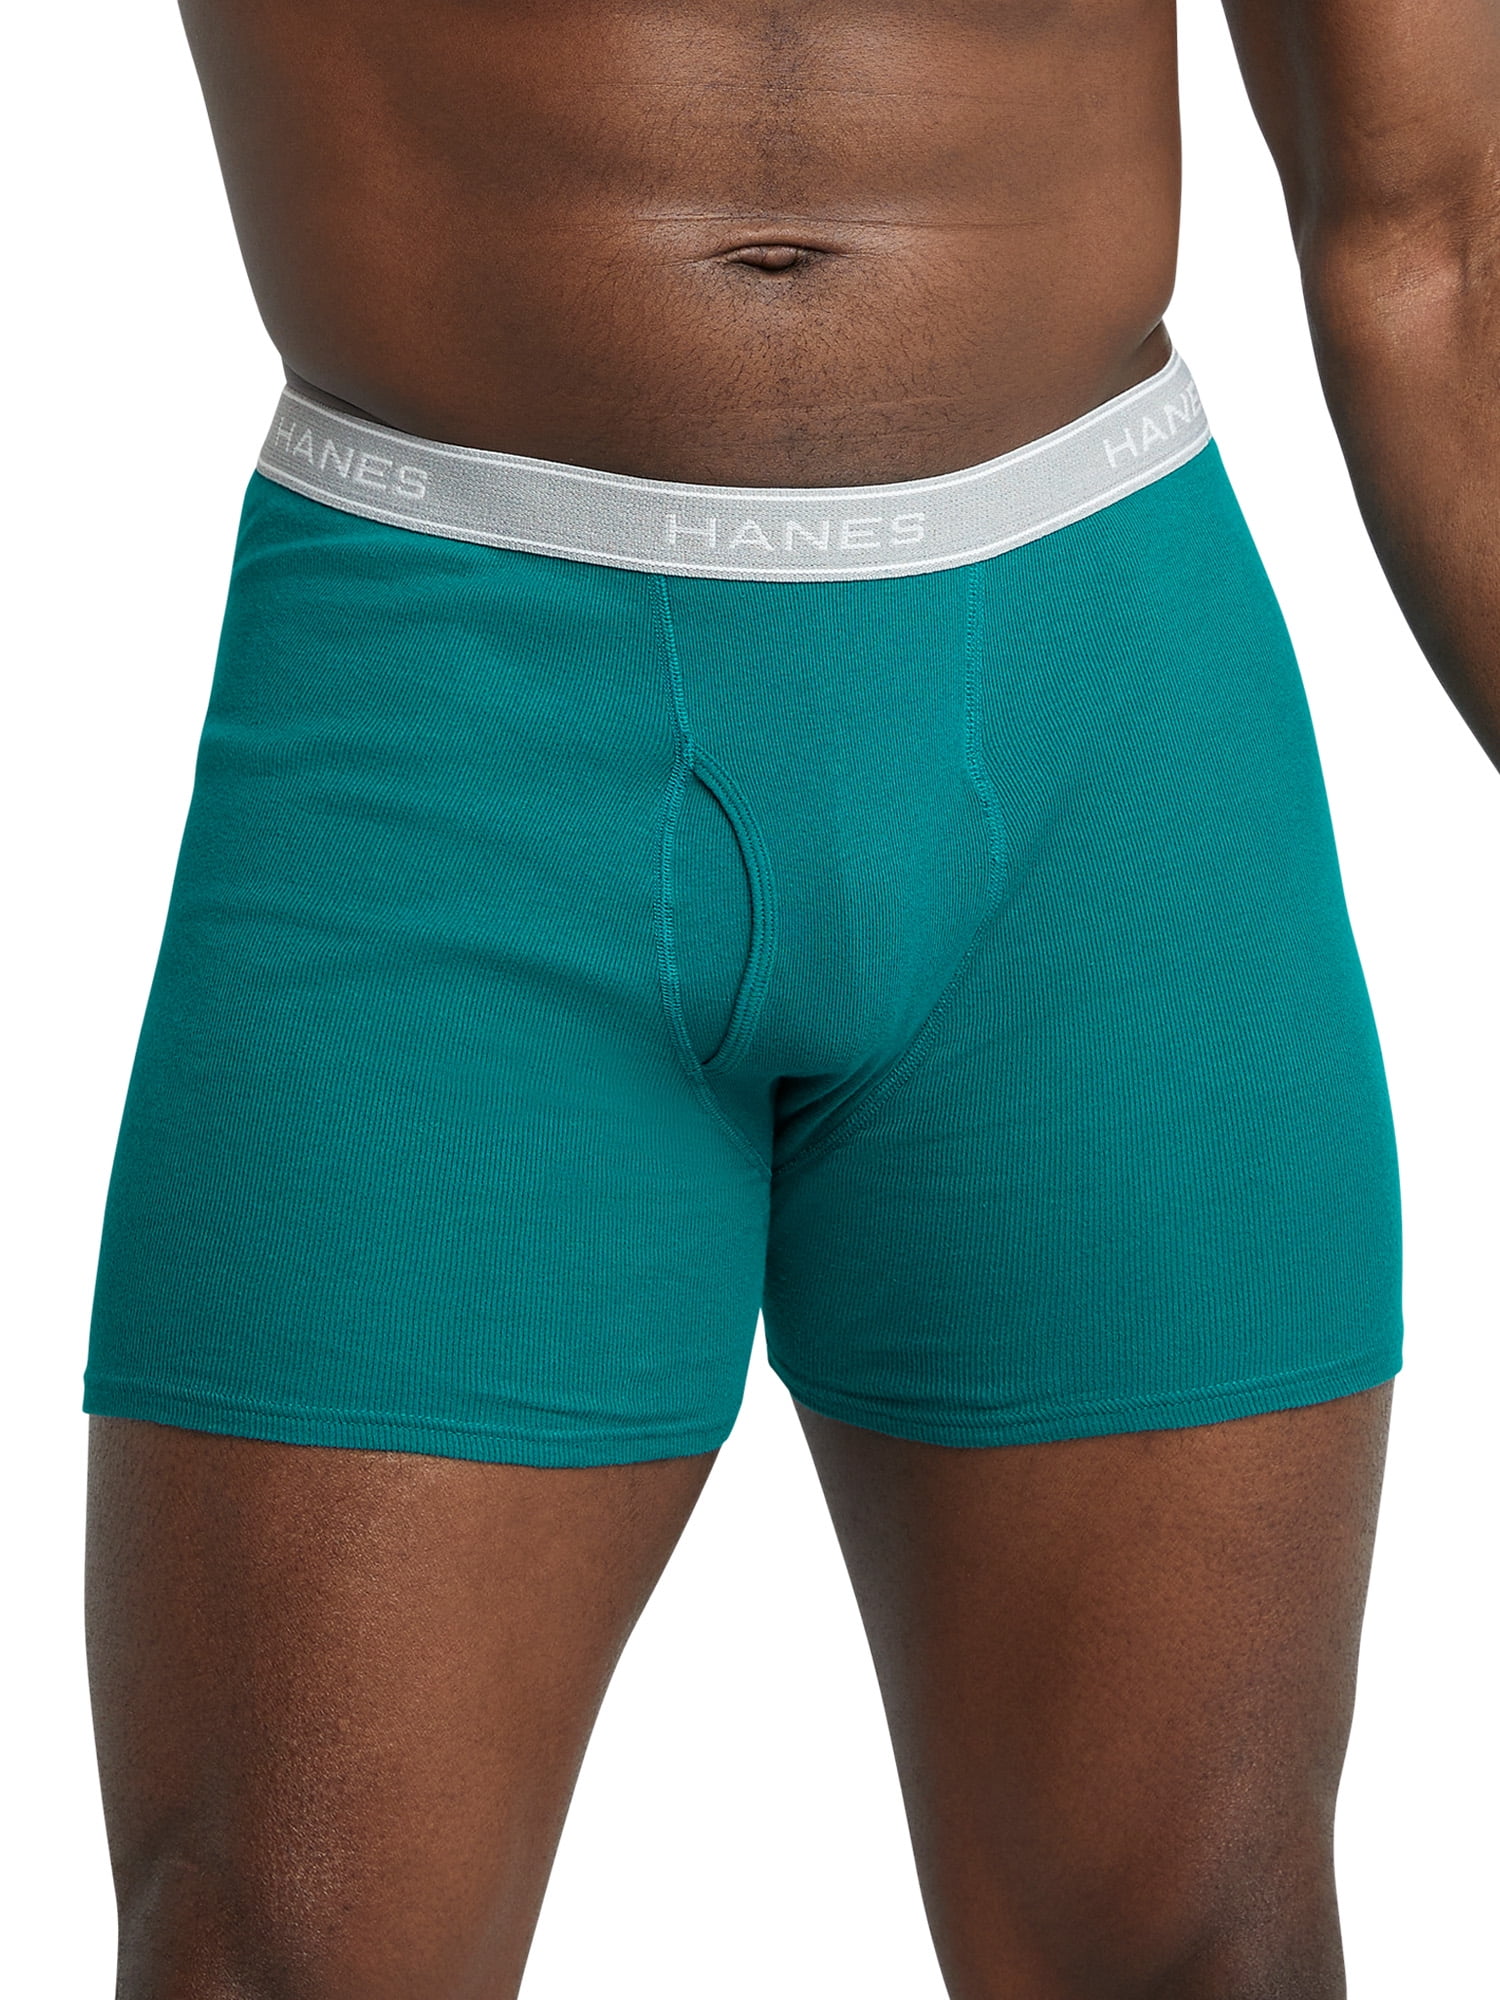 Core Mixed Colour 10 pack A-Front Boxers